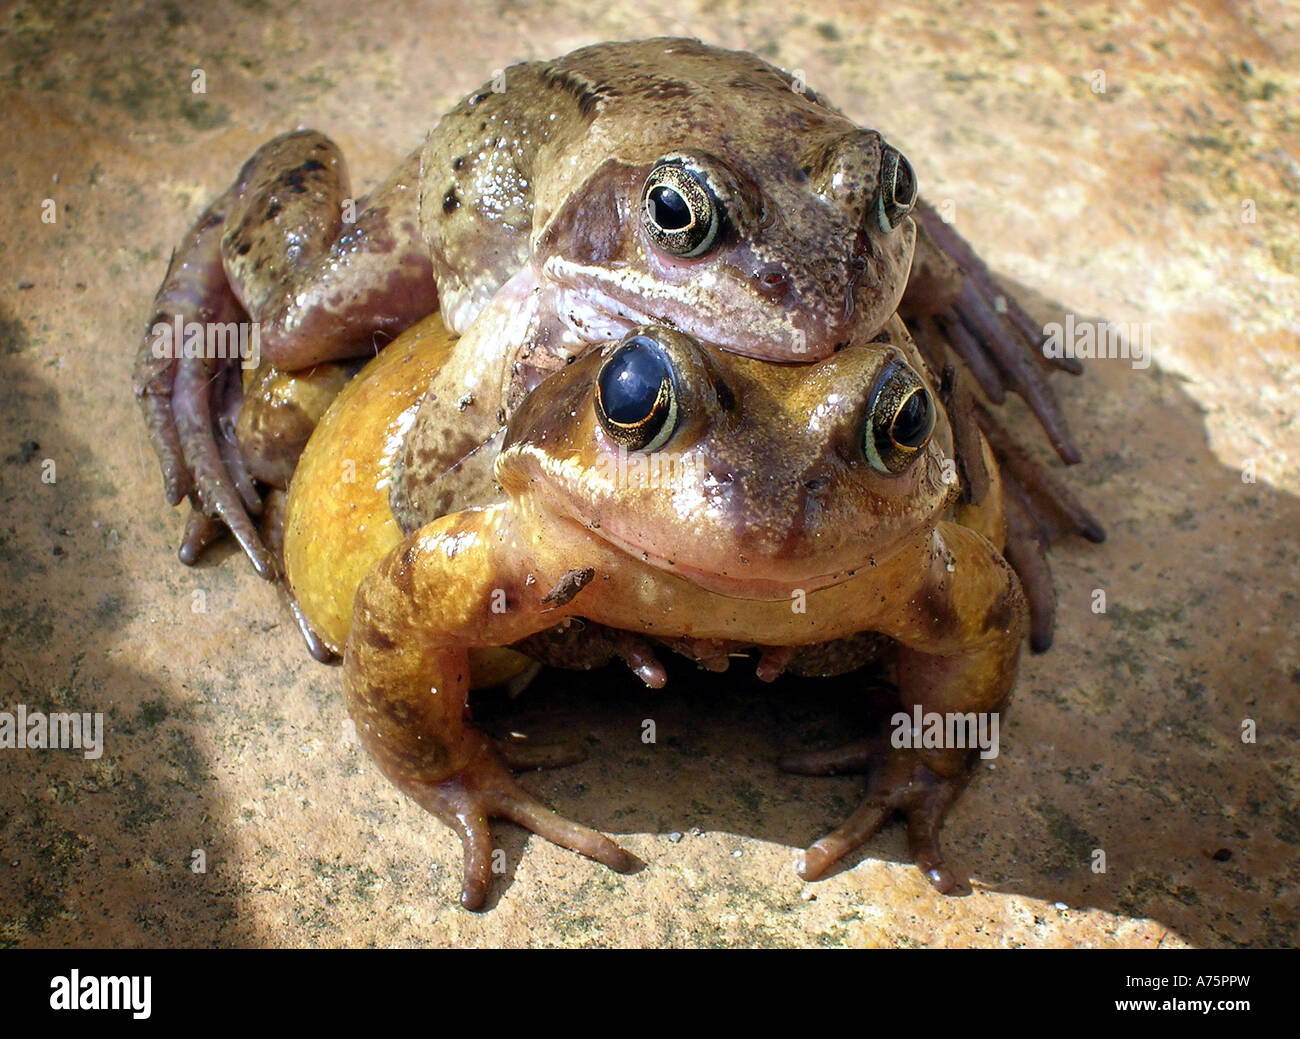 TWO NATIVE BRITISH FROGS IN A MATING POSITION RE SPRINGTIME SPRING REPRODUCTION TADPOLES BREEDING WILDLIFE GARDEN FROG SPAWN UK Stock Photo